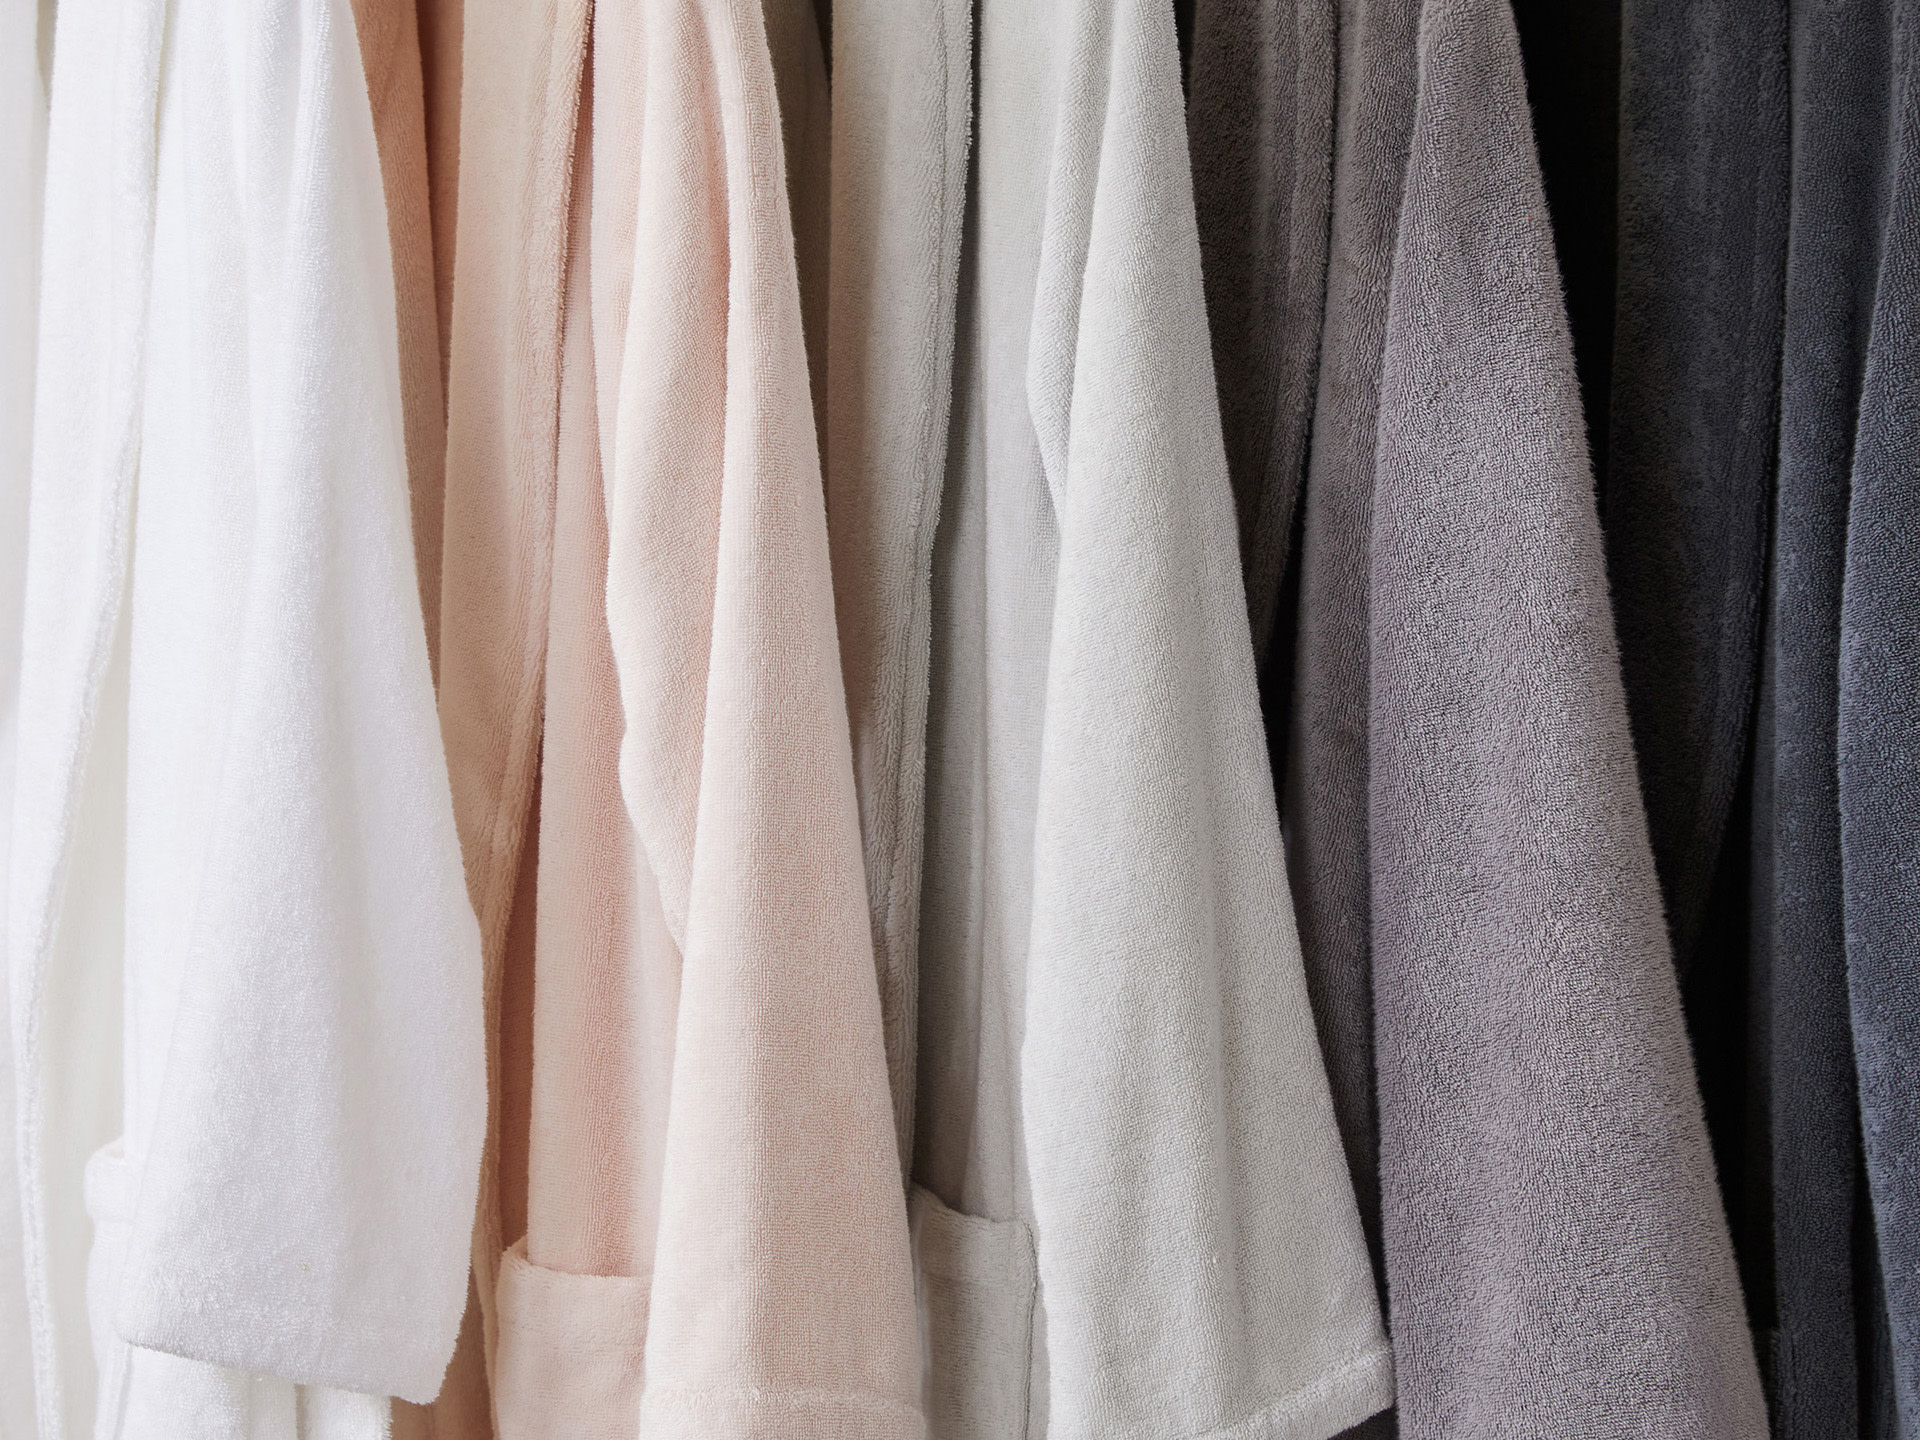 White, blush, mineral, stone, and dusk robes hanging side by side